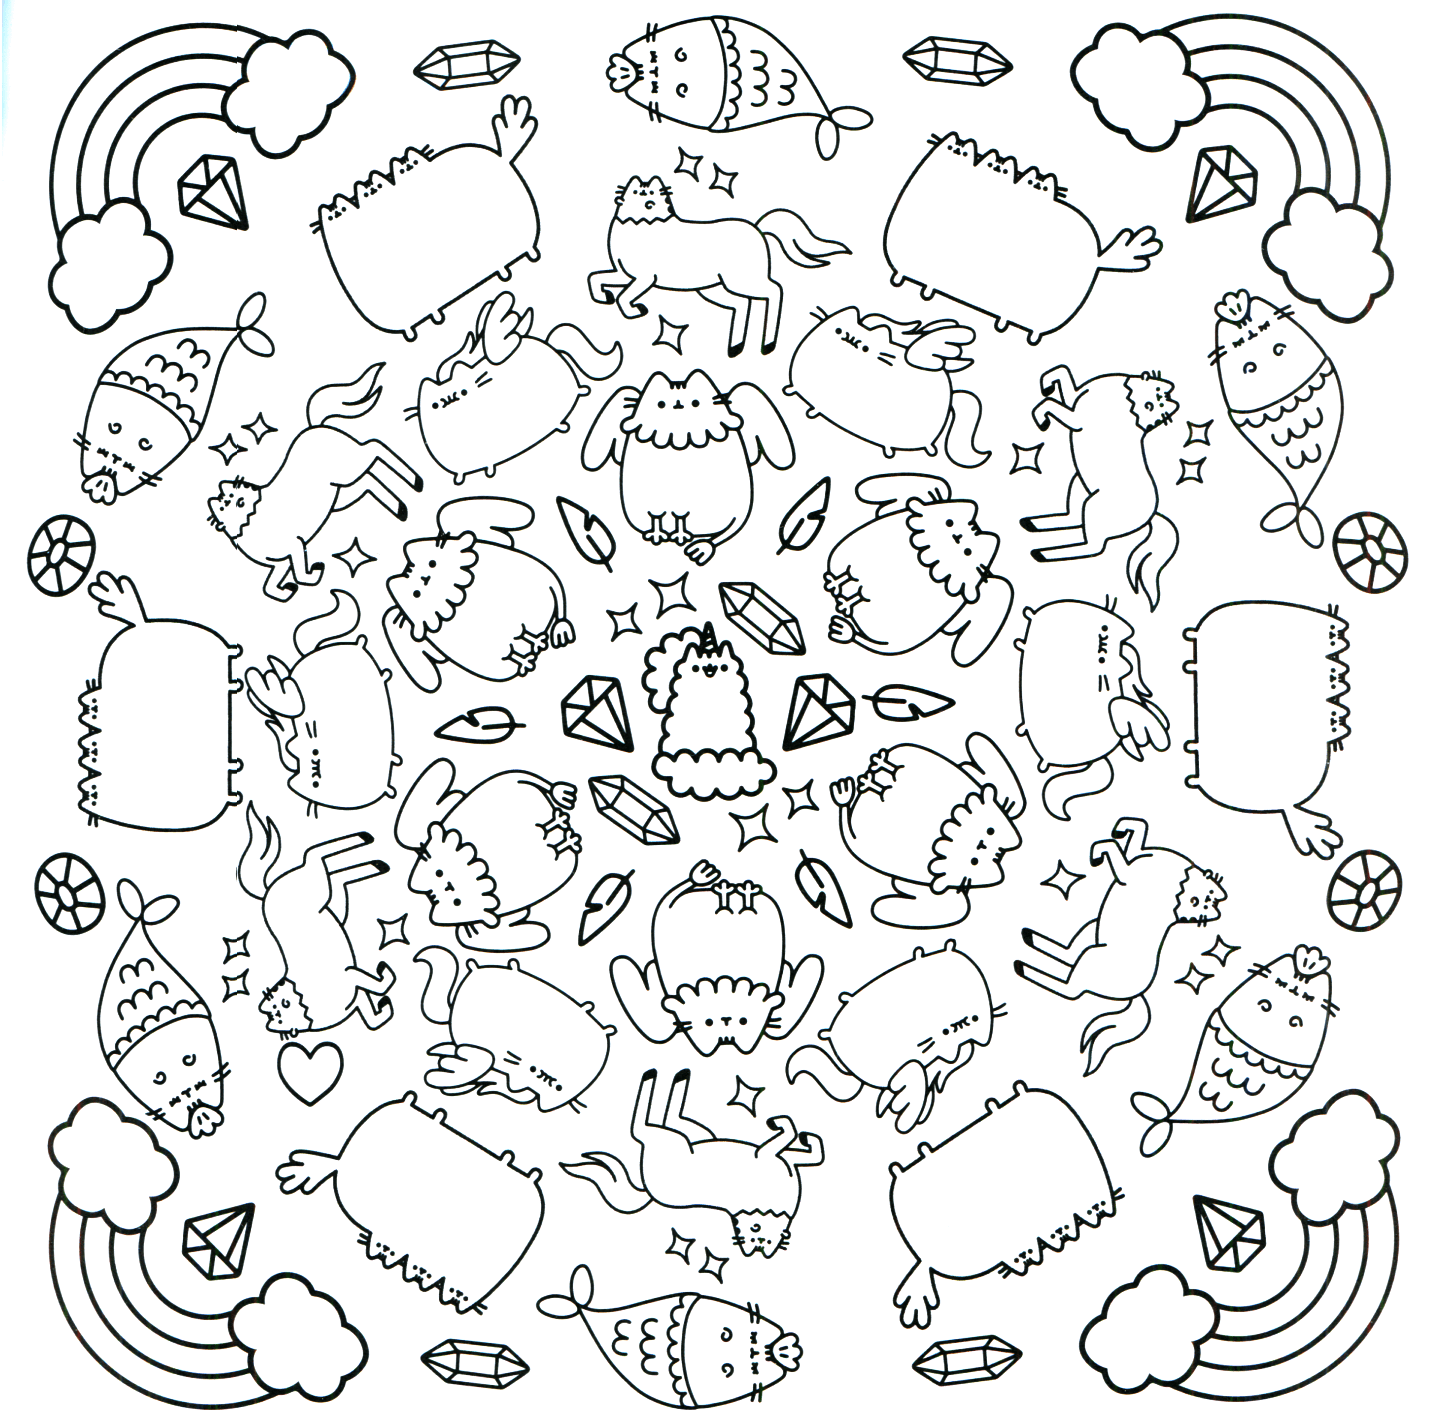 Pusheen Cat Collage Coloring Page